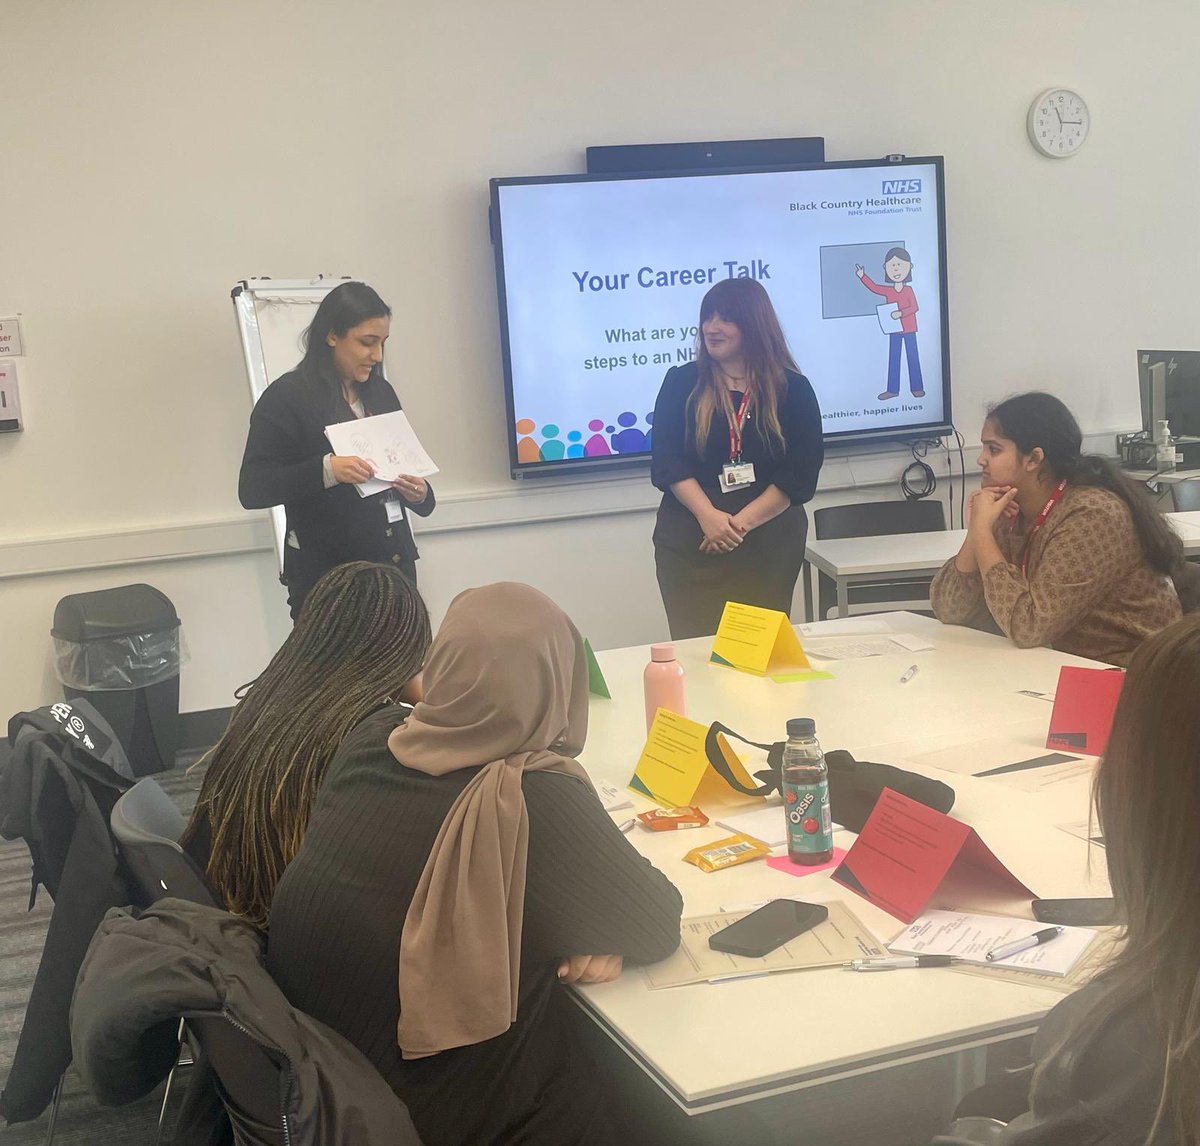 This morning our WEx students have been presenting which #NHSCareer they would like to join & the steps they need to take with their studies  ⭐️ it was wonderful to hear the variety of careers people were interested in - future Drs, Nurses, Software Engineers and Electricians 🤩